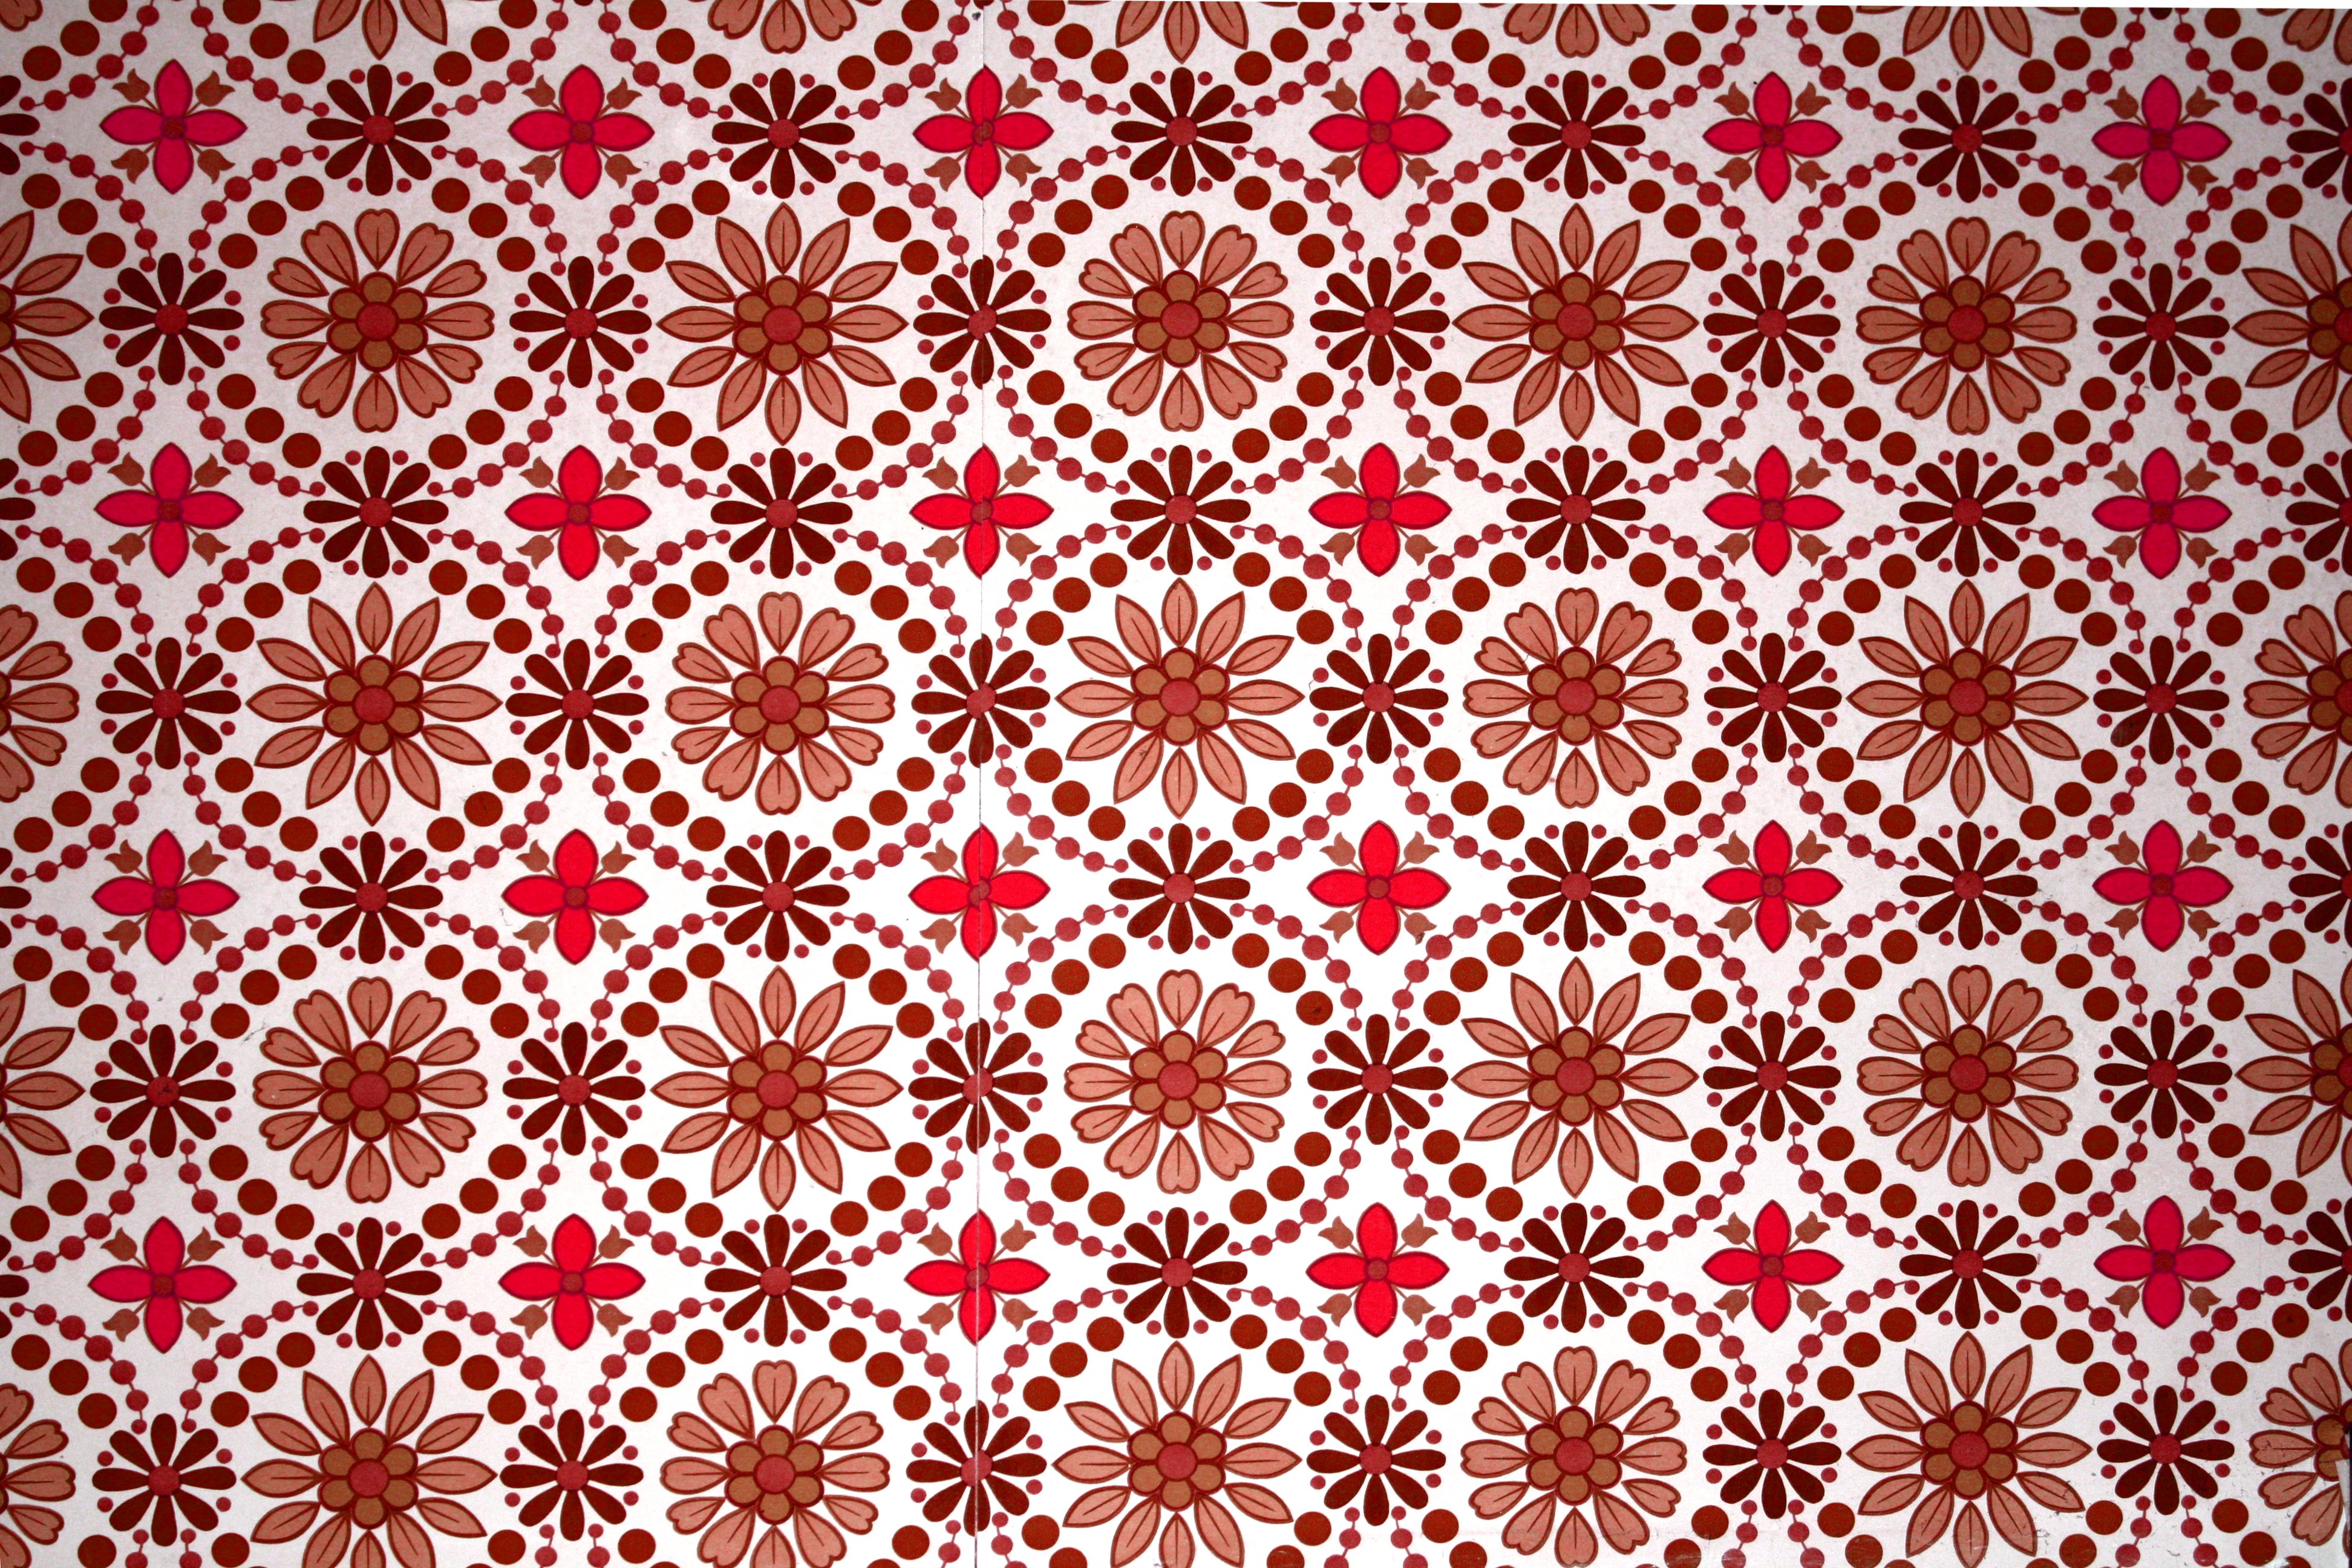 Brown and Red Flower Wallpaper Texture Picture | Free Photograph | Photos  Public Domain